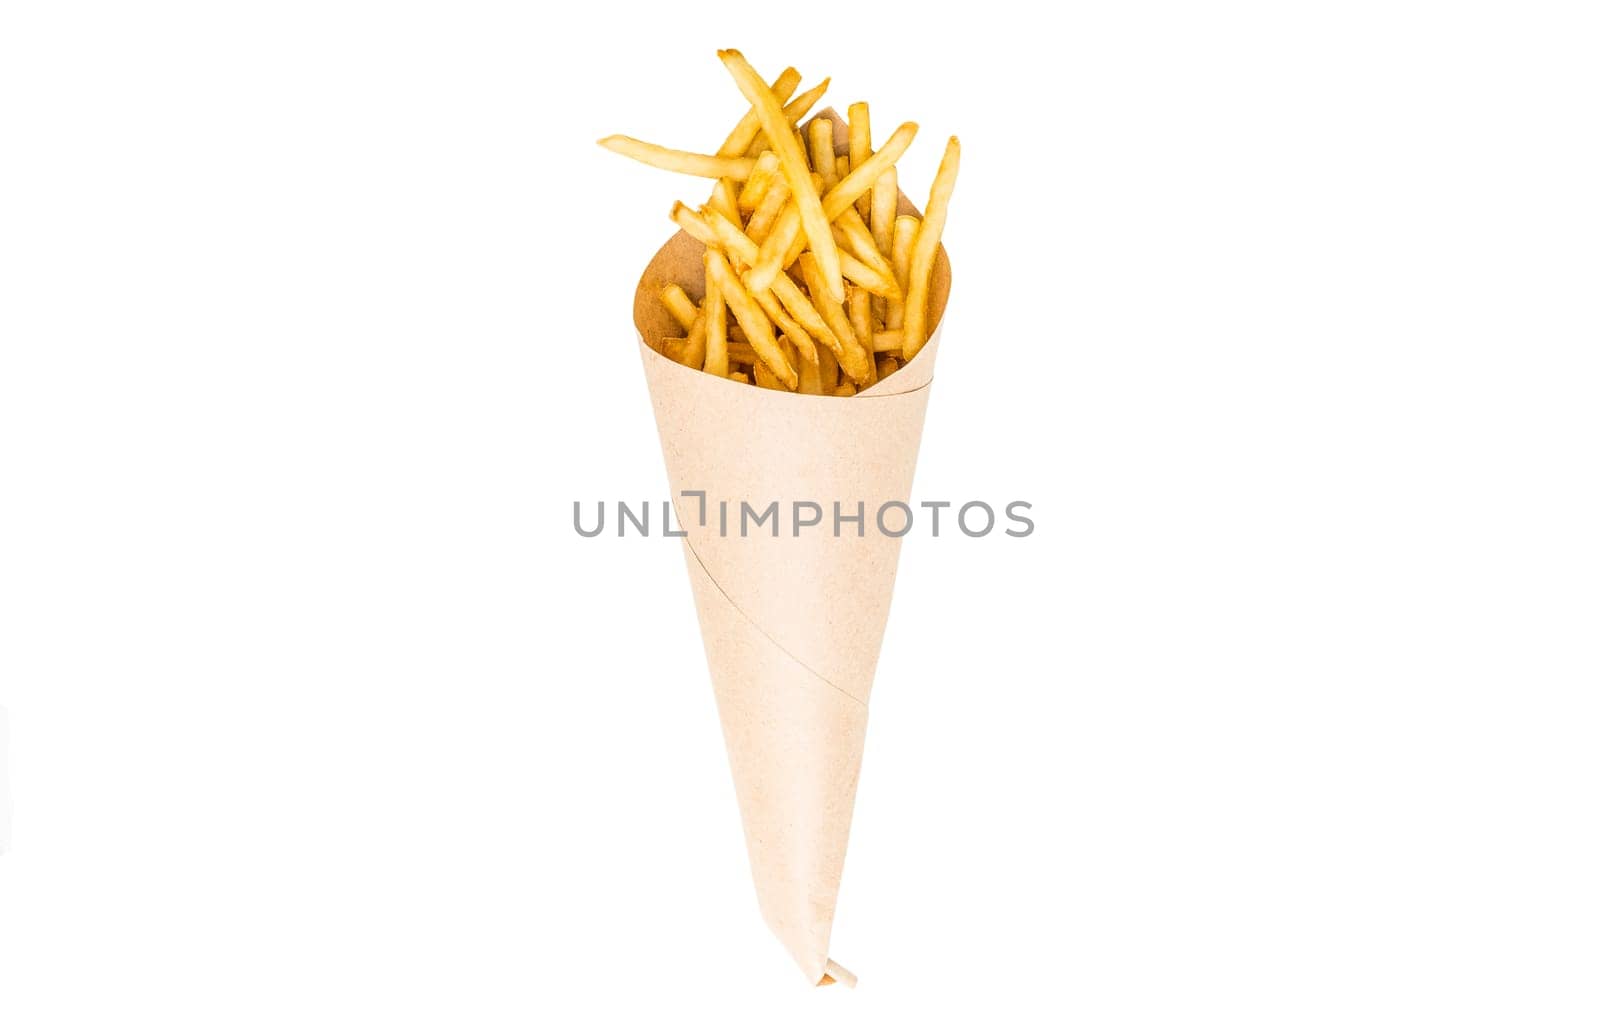 French fries wrapped in paper on white background by GekaSkr